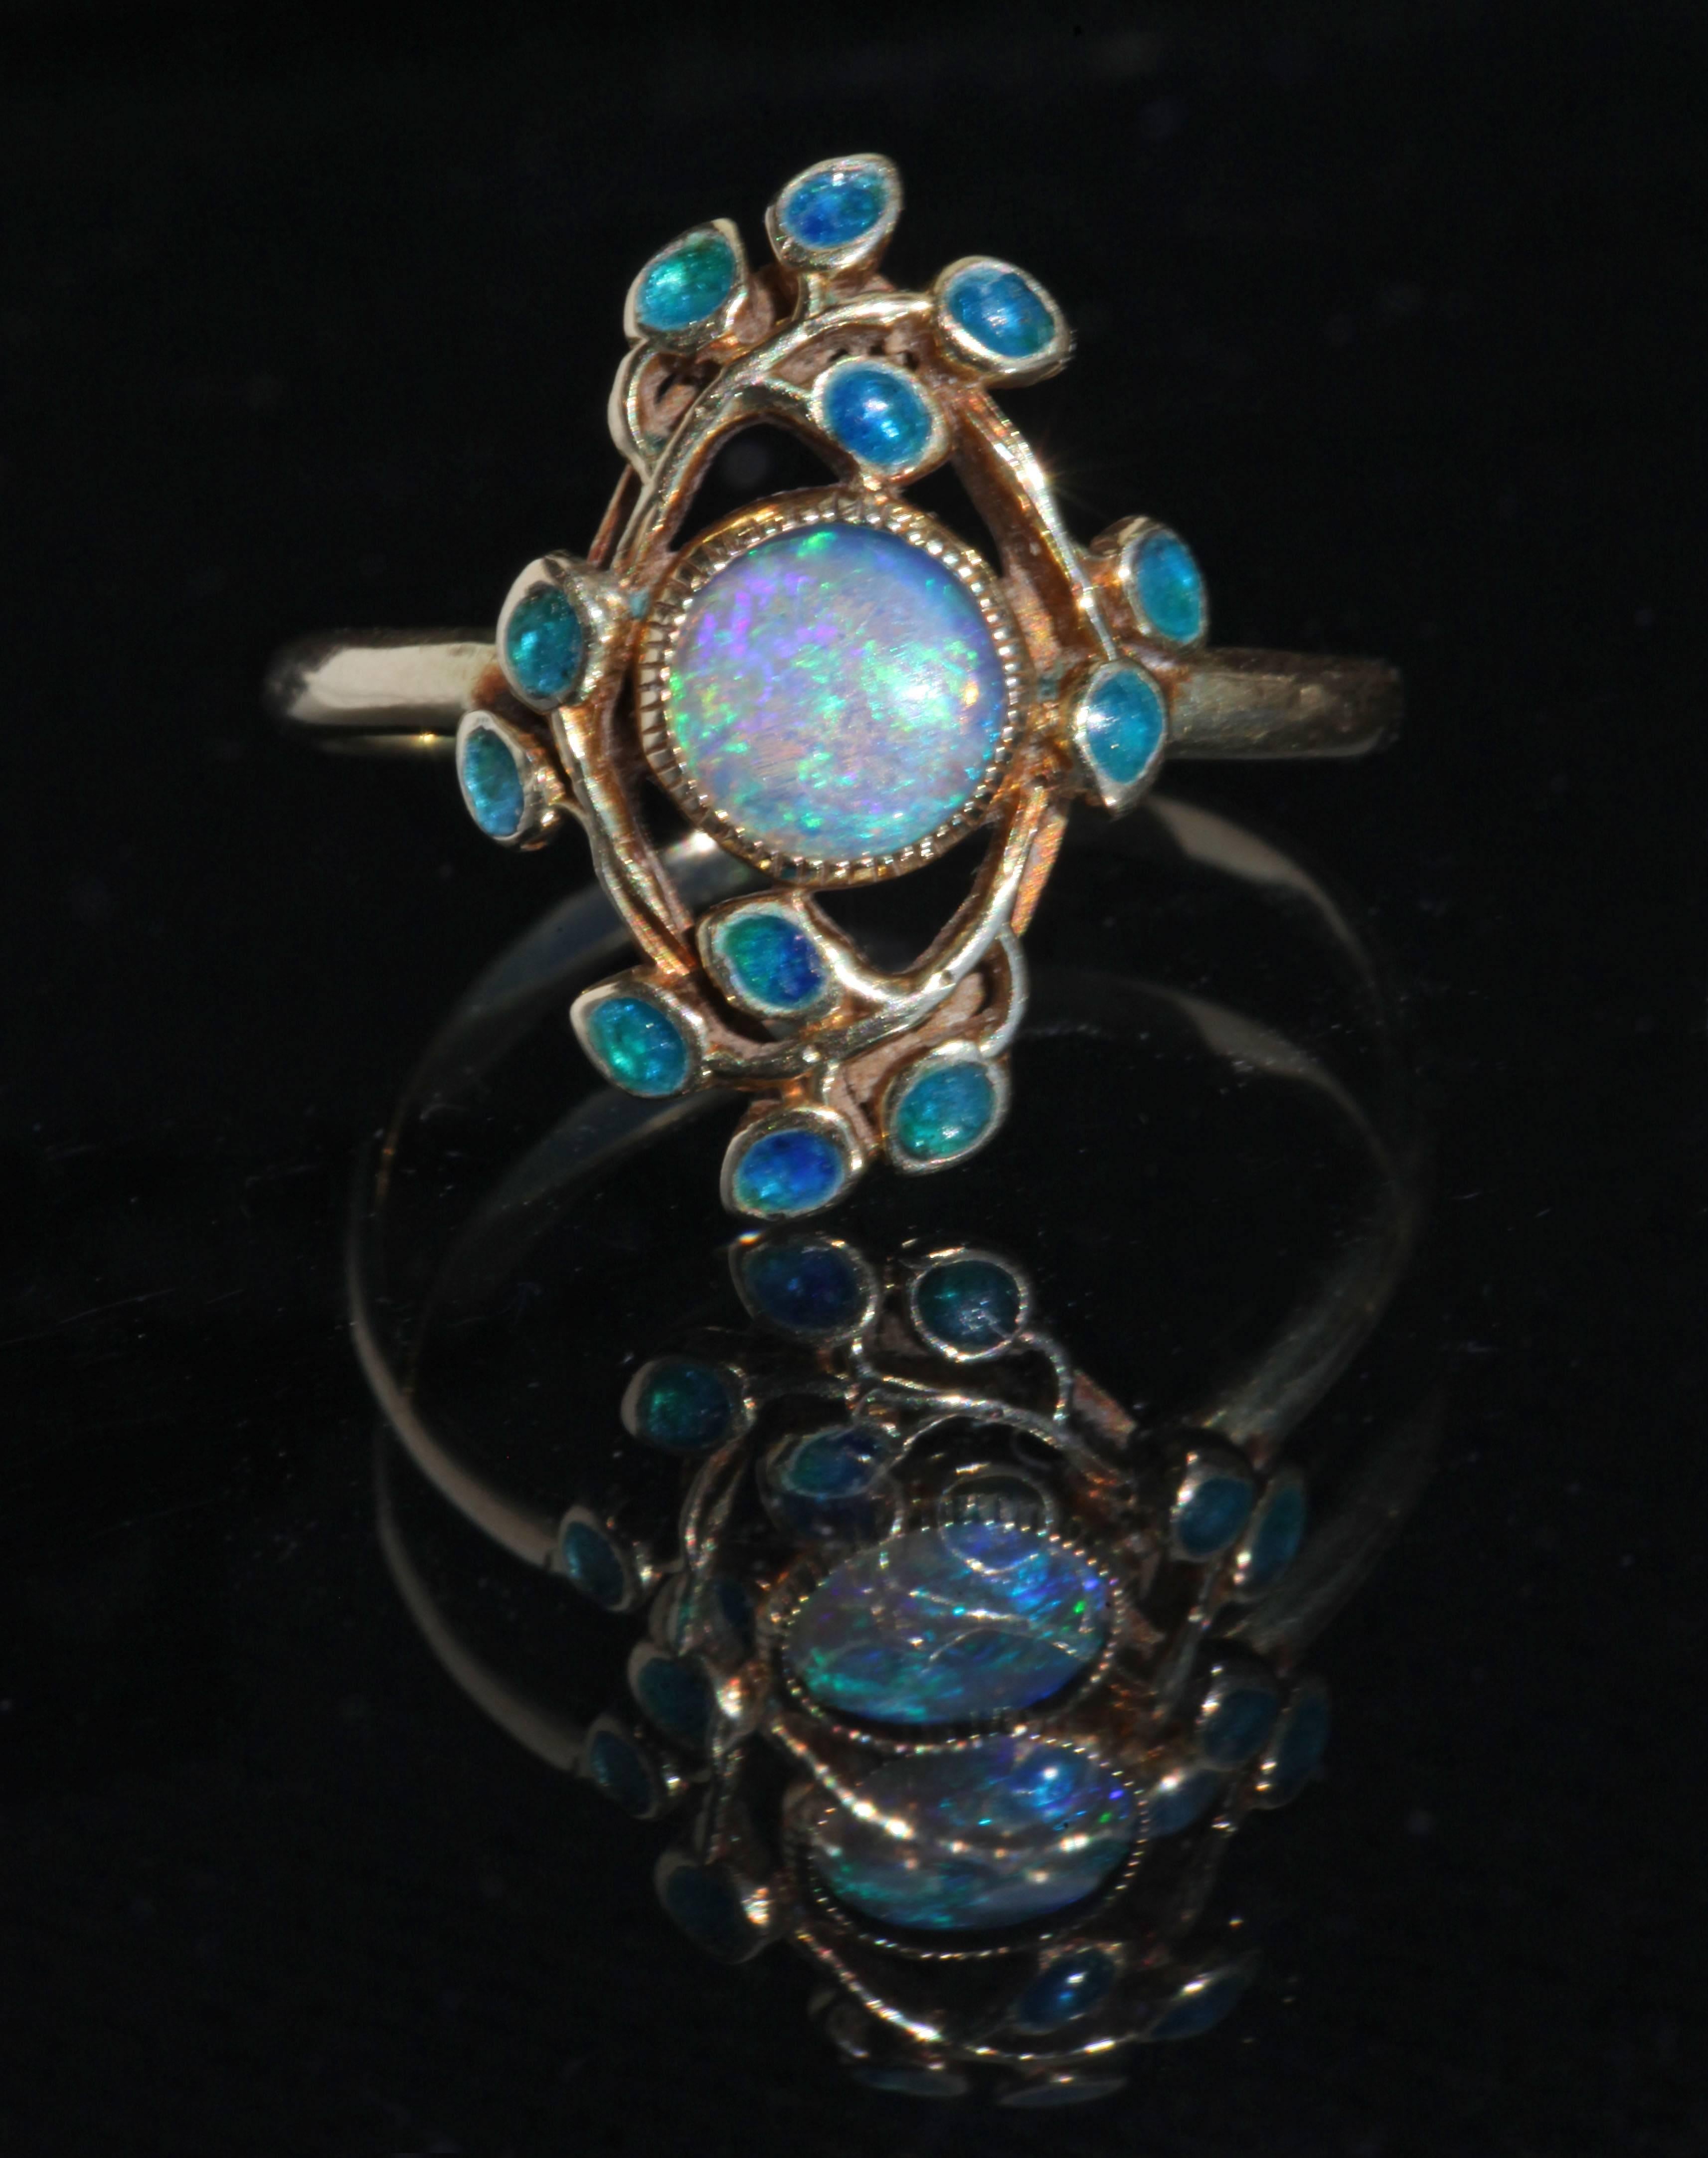 A beautiful Liberty & Co ring designed by Jessie M. King in gold & opal with enameled leaves
Documented Liberty Line Drawings page 73 catalogue number: 4197
Marked: '15ct'
Ring Size UK: O   US: 7.25   EU: 55.1   Asia: 14.5 




